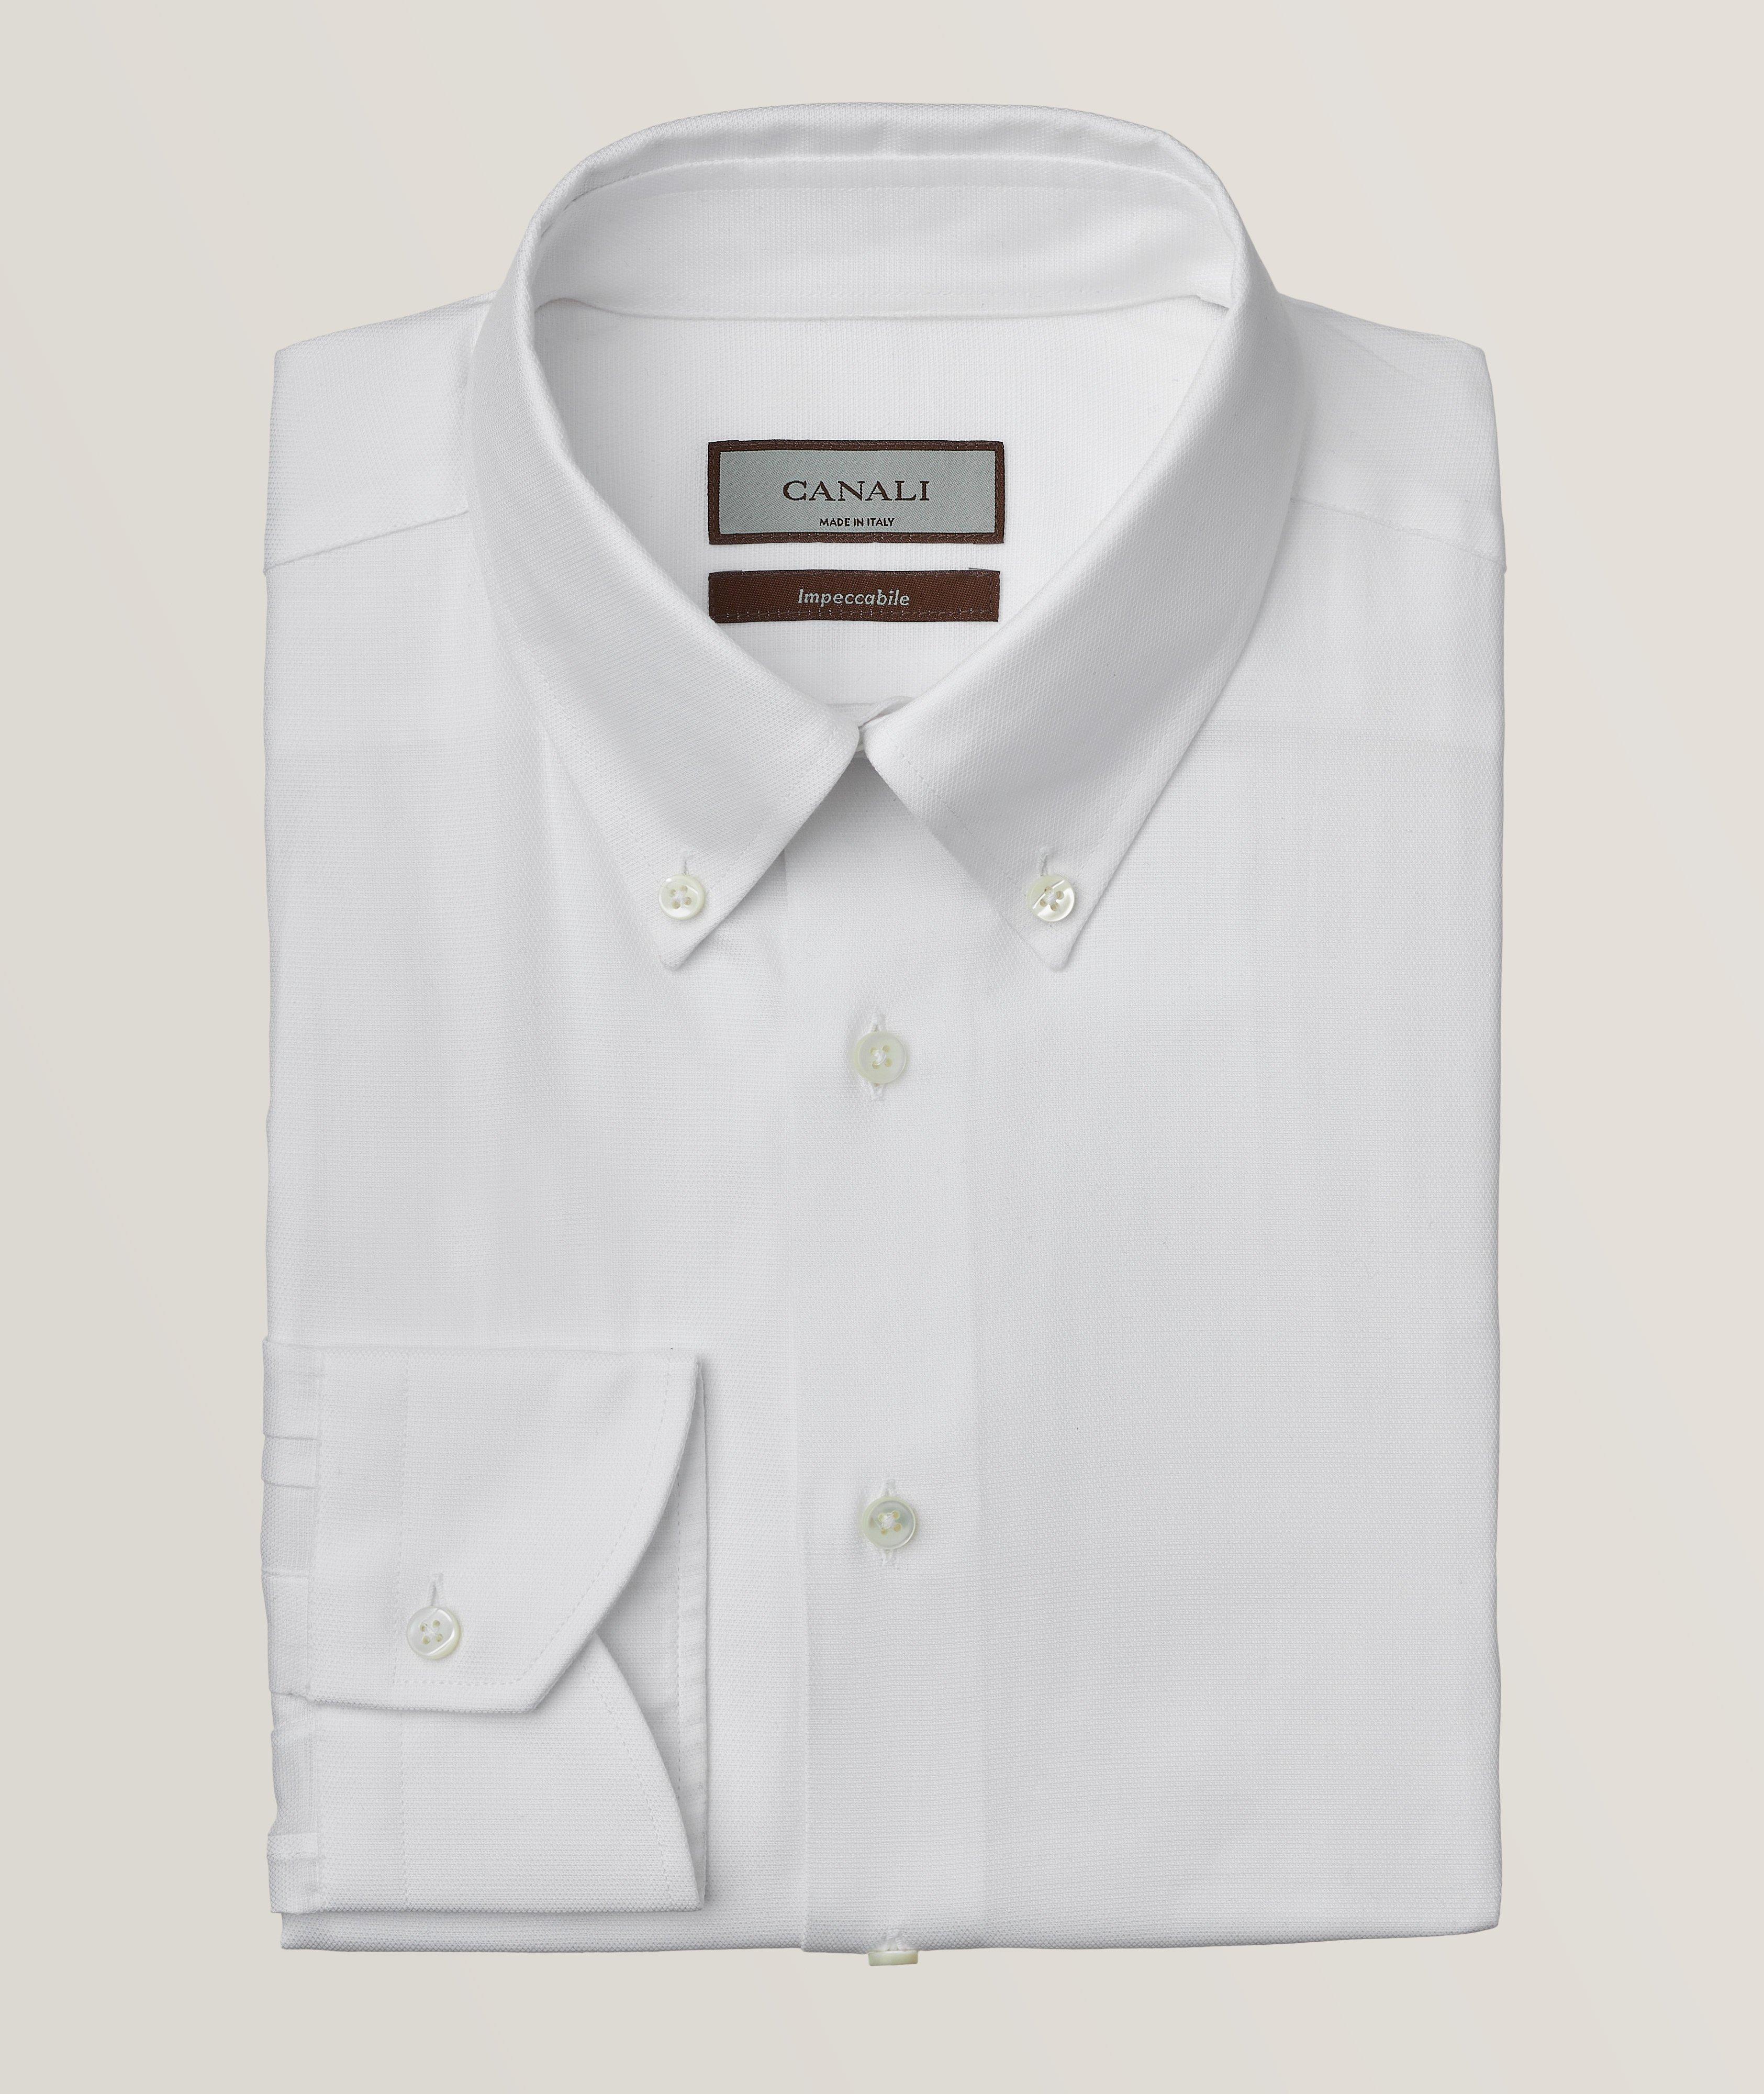 Canali Contemporary-Fit Impeccable Button-Down Collar Dress Shirt